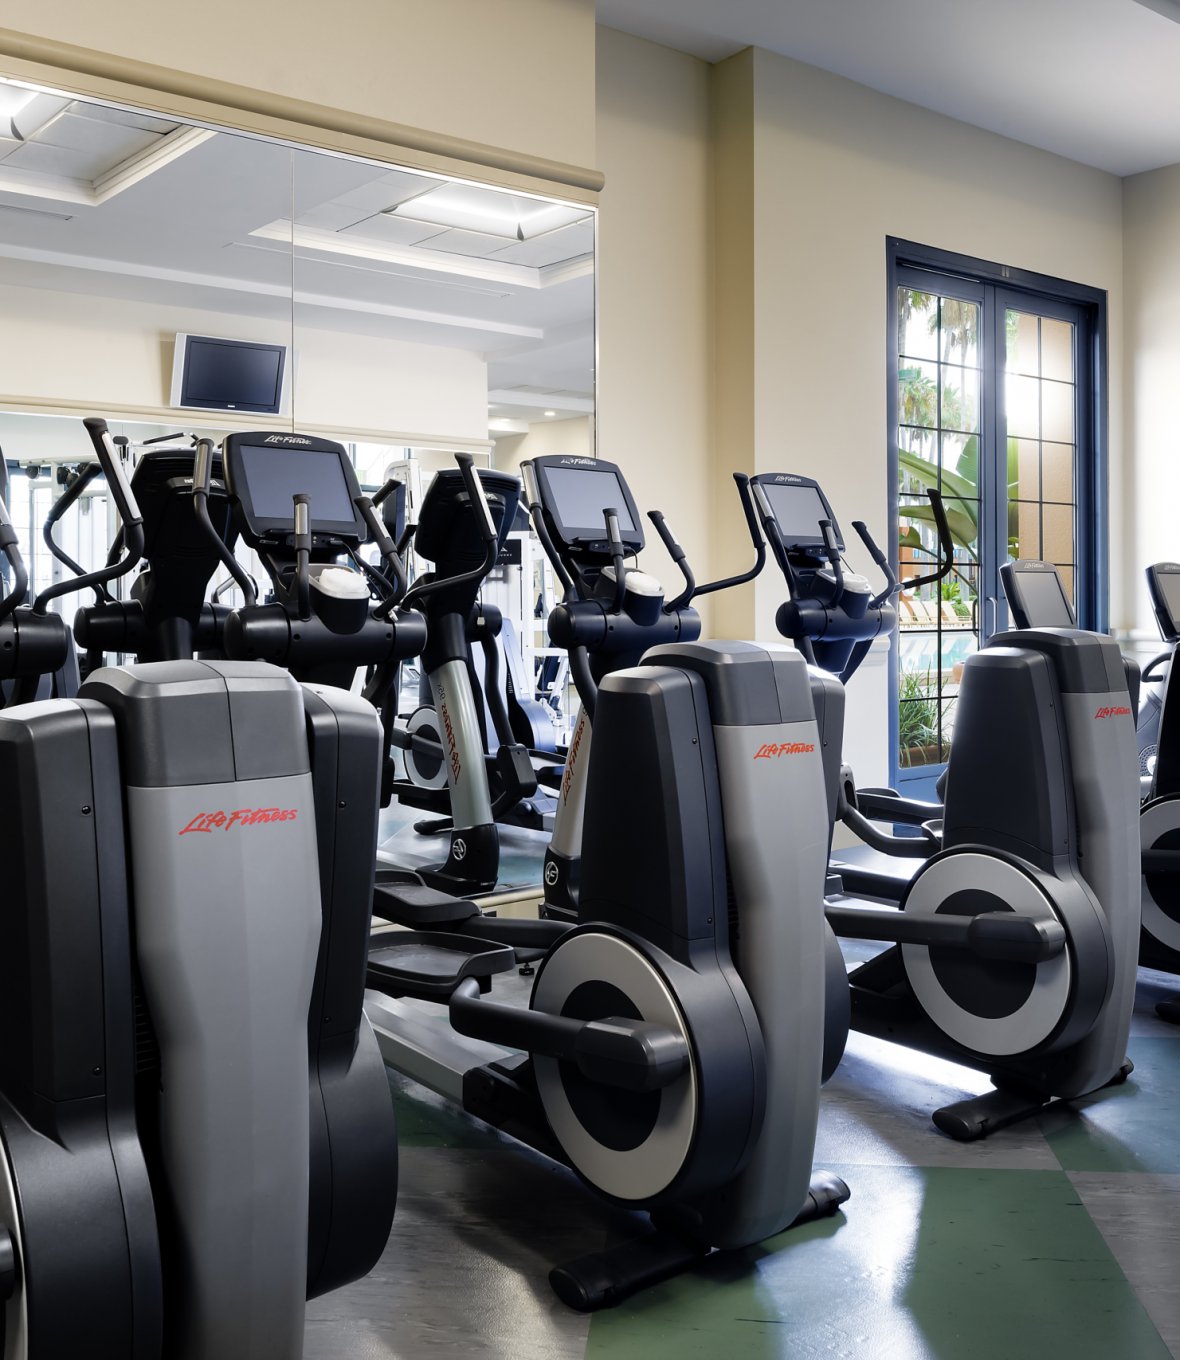 Exercise machines in the Swan health club.